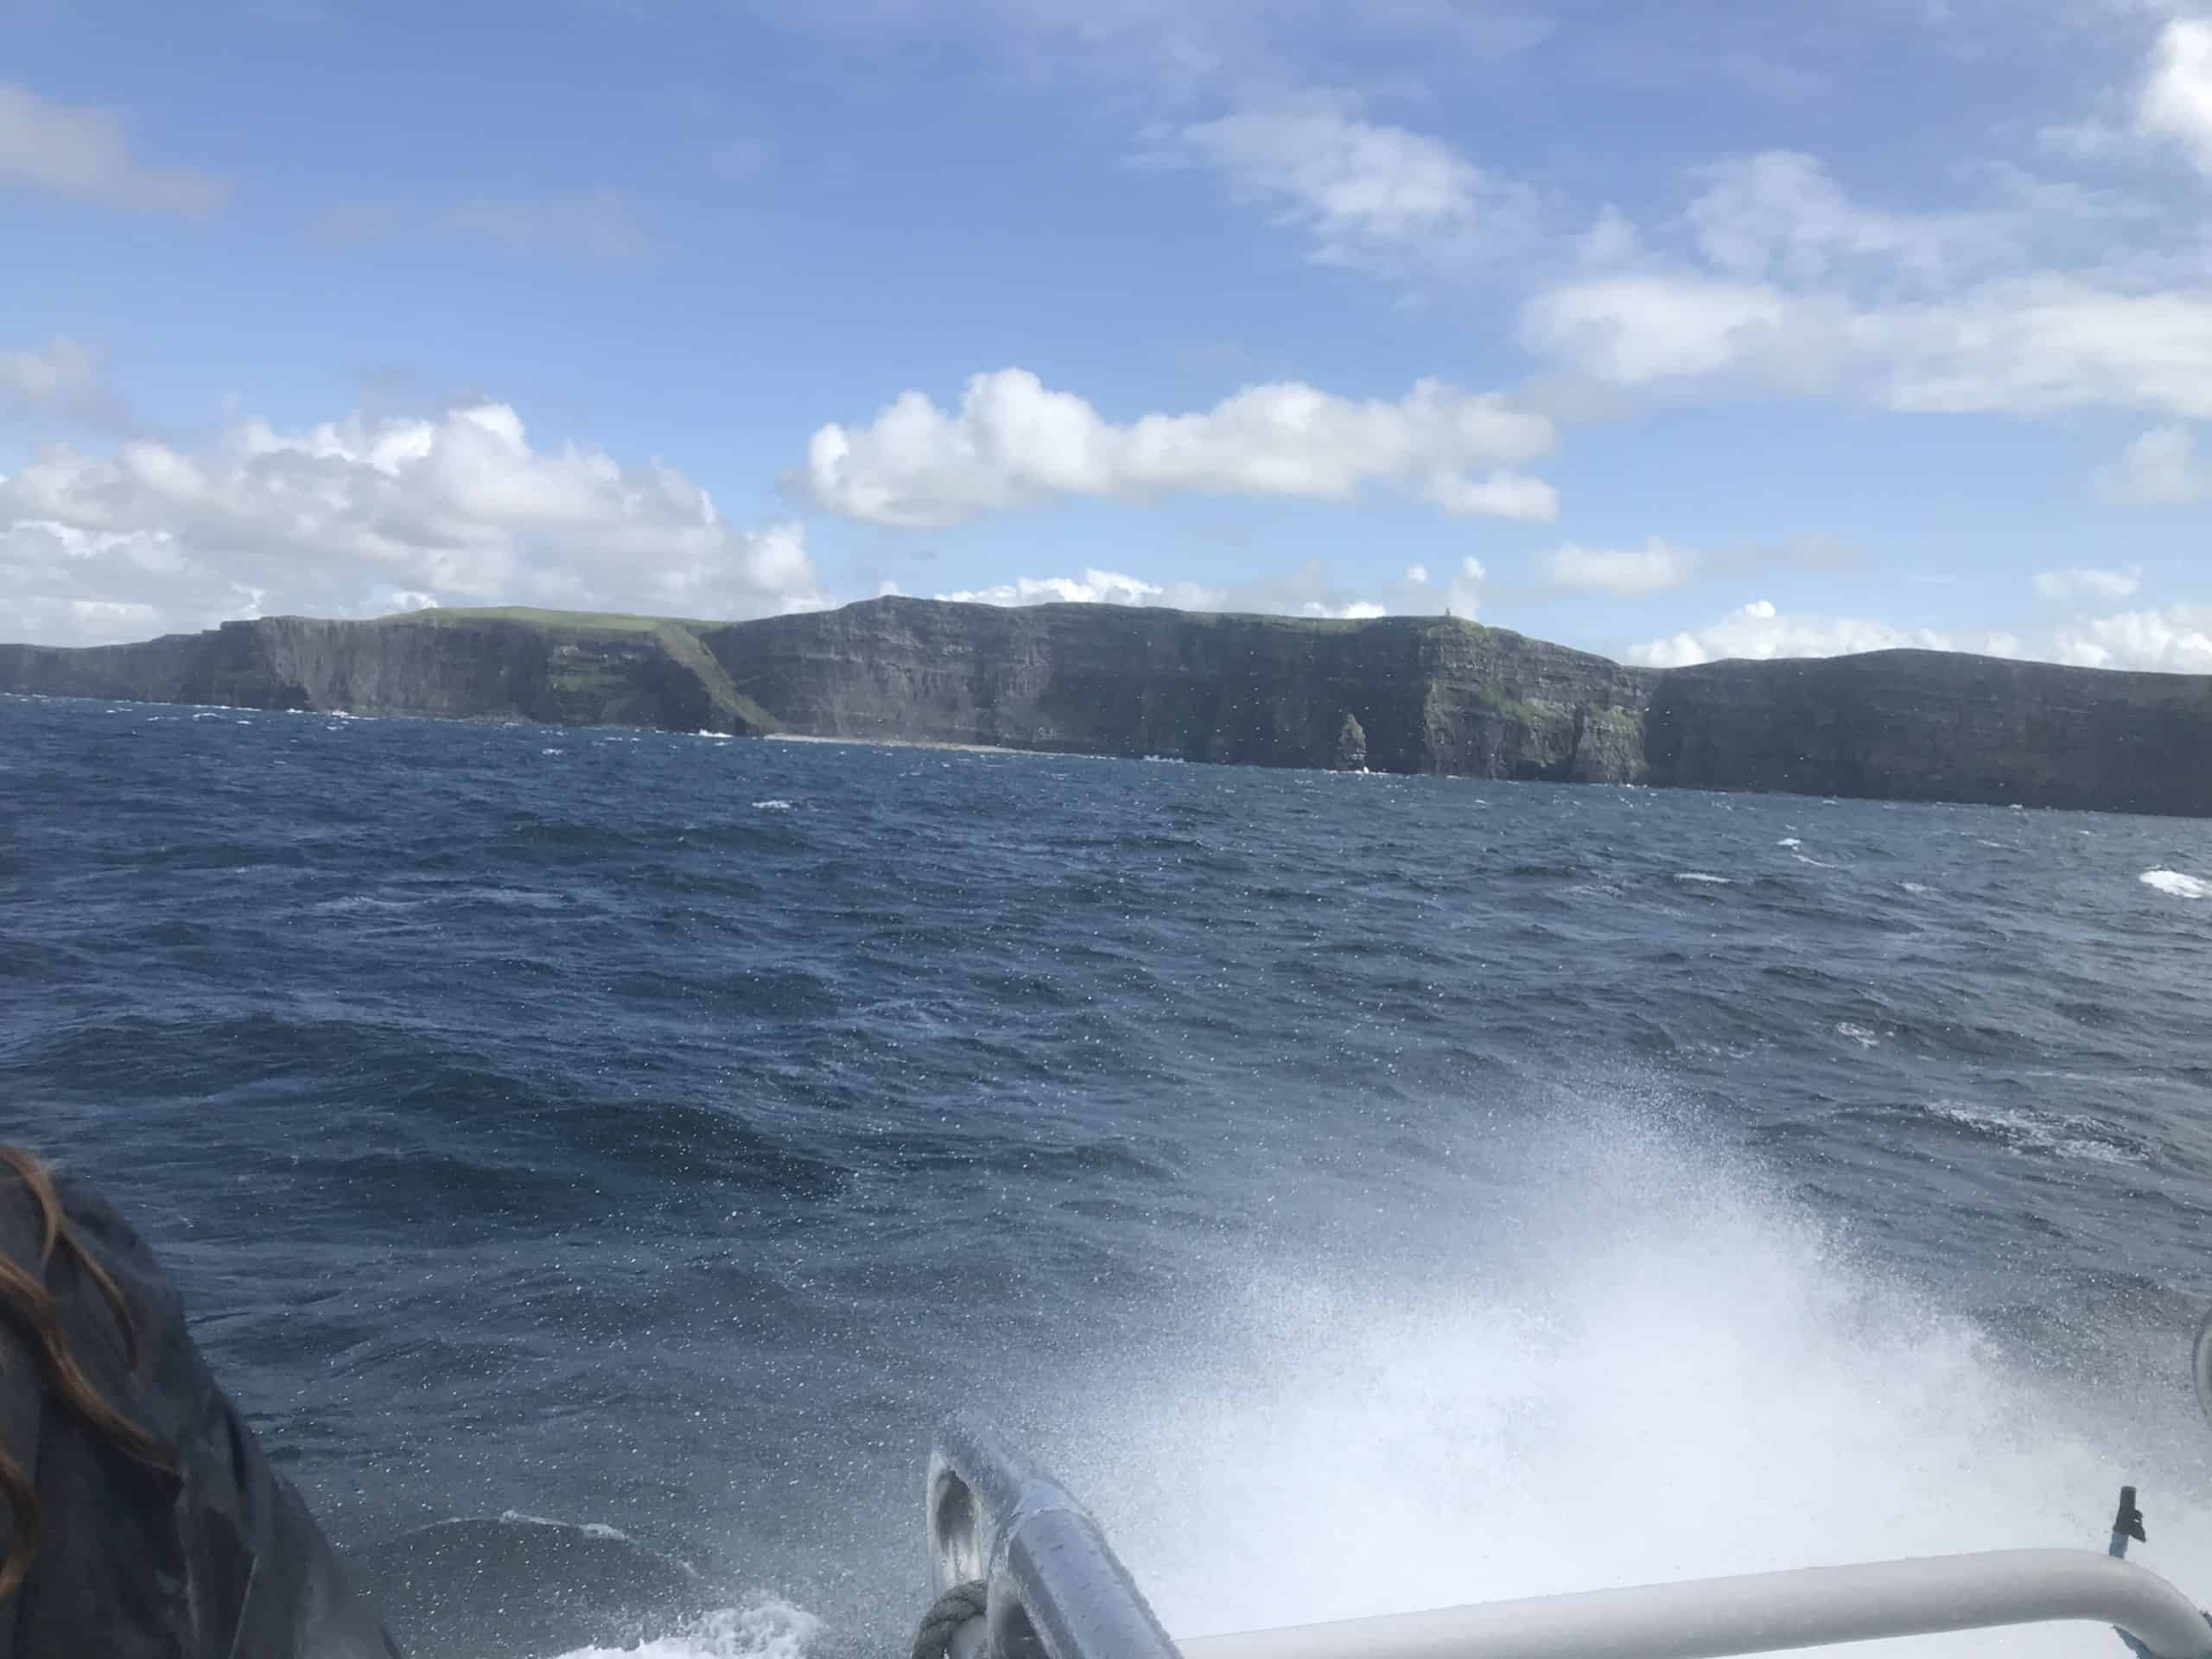 Blue sunny sky with some clouds. Cliffs of Moher in the distance as I'm riding a boat. A white wave makes a big splash. Choppy rolling waves of the blue Atlantic Ocean. Nearby Doolin along the Wild Atlantic Way, Ireland.